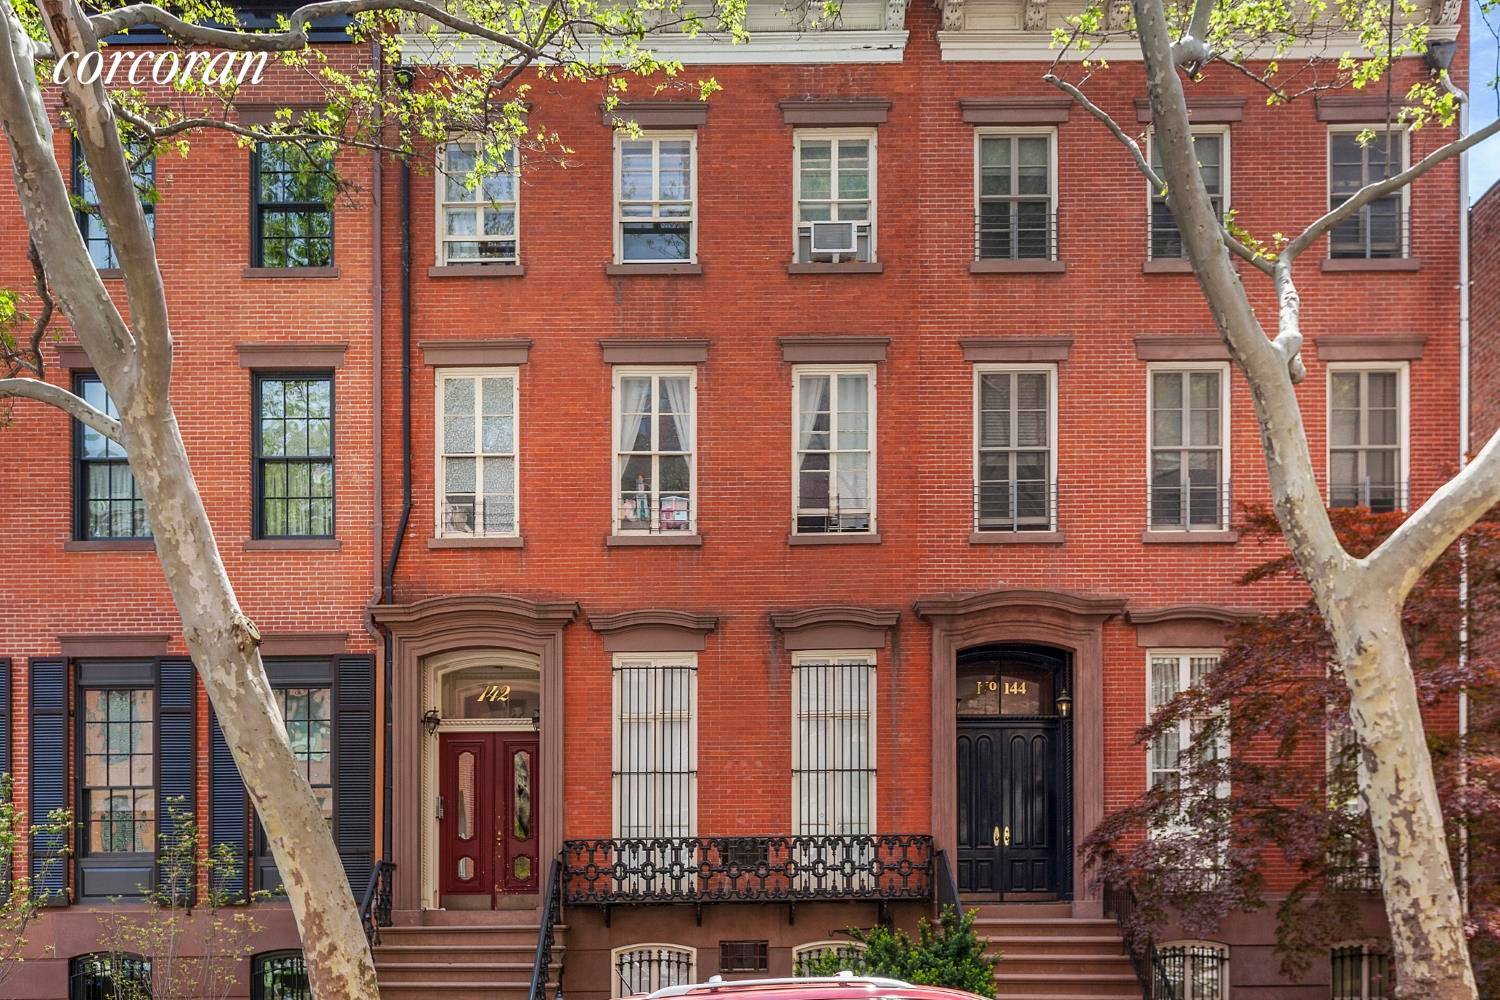 Constructed by Linus Scudder in 1855, this grand Italianate style townhouse is superbly positioned on one of the most charming and prestigious, tree lined townhouse blocks in Greenwich Village.